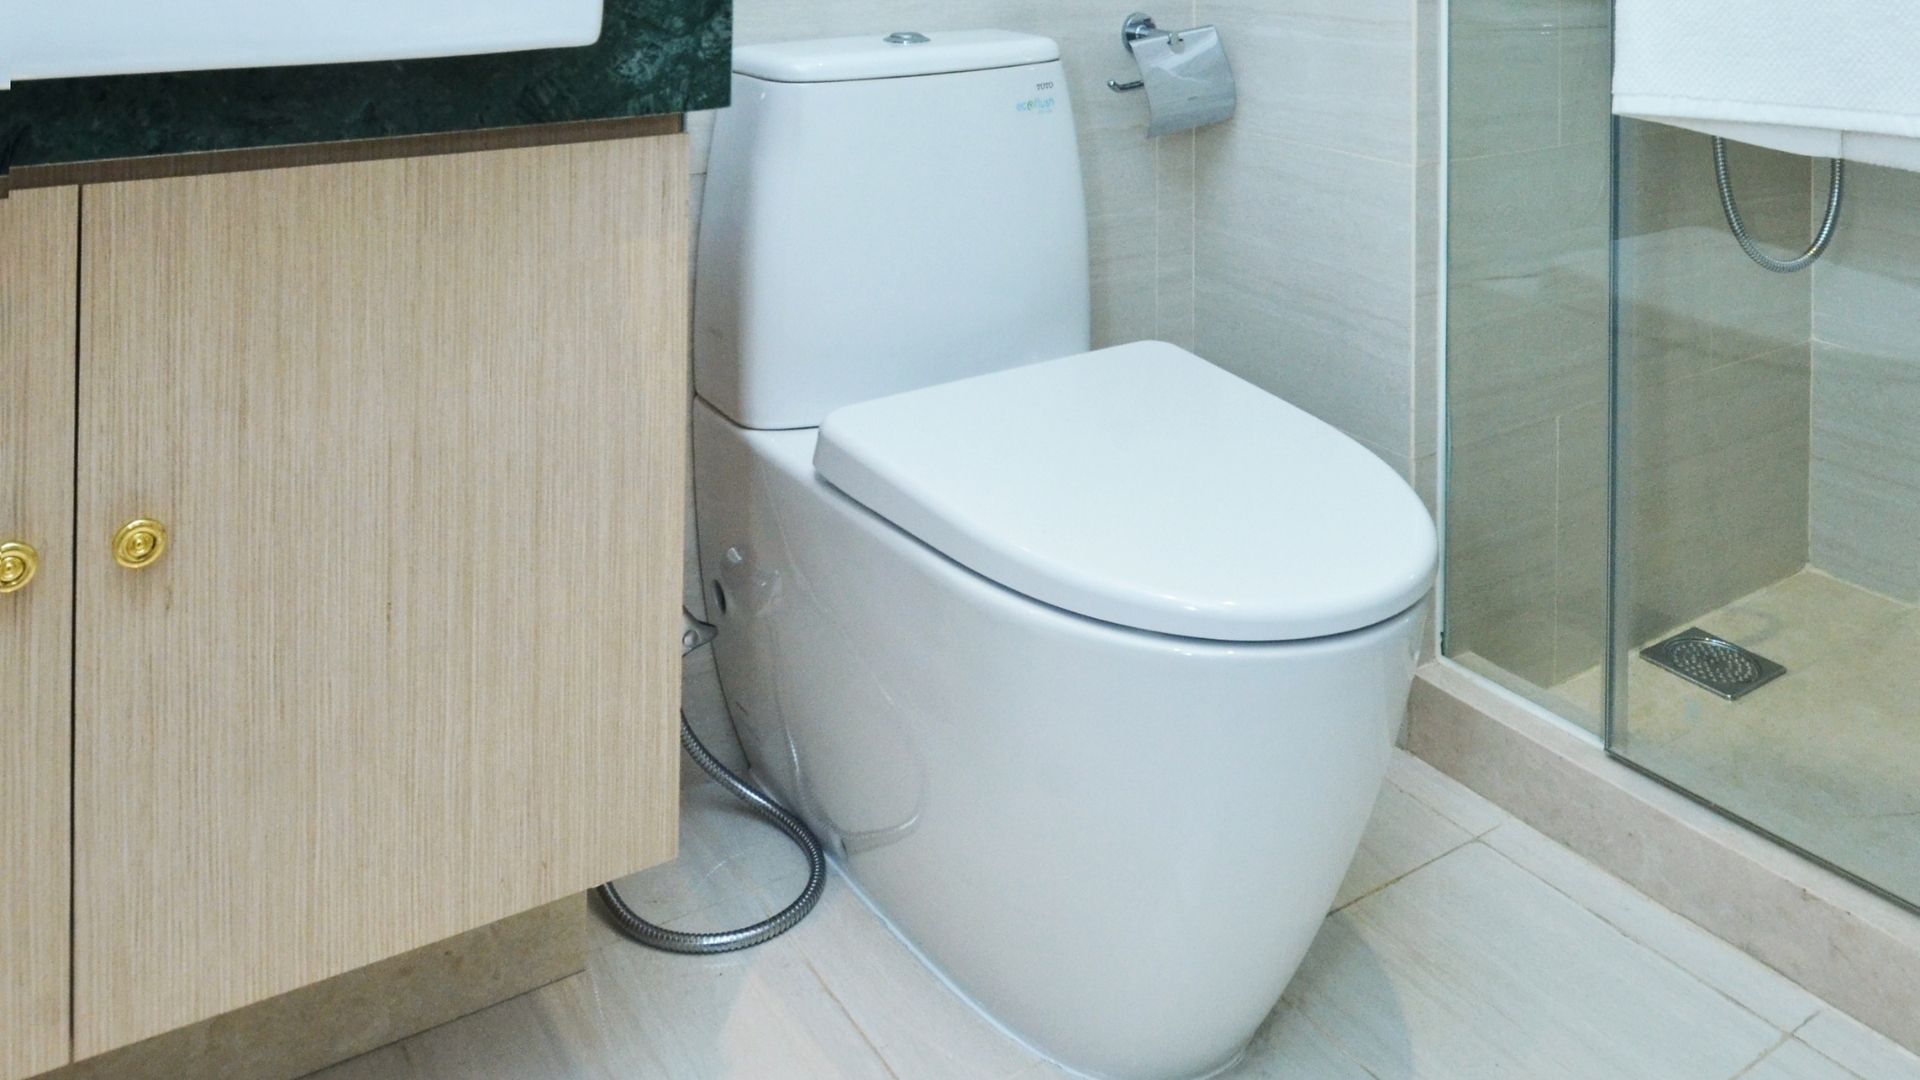 The One Thing You Need To Do To Keep Your Toilet Clean Longer